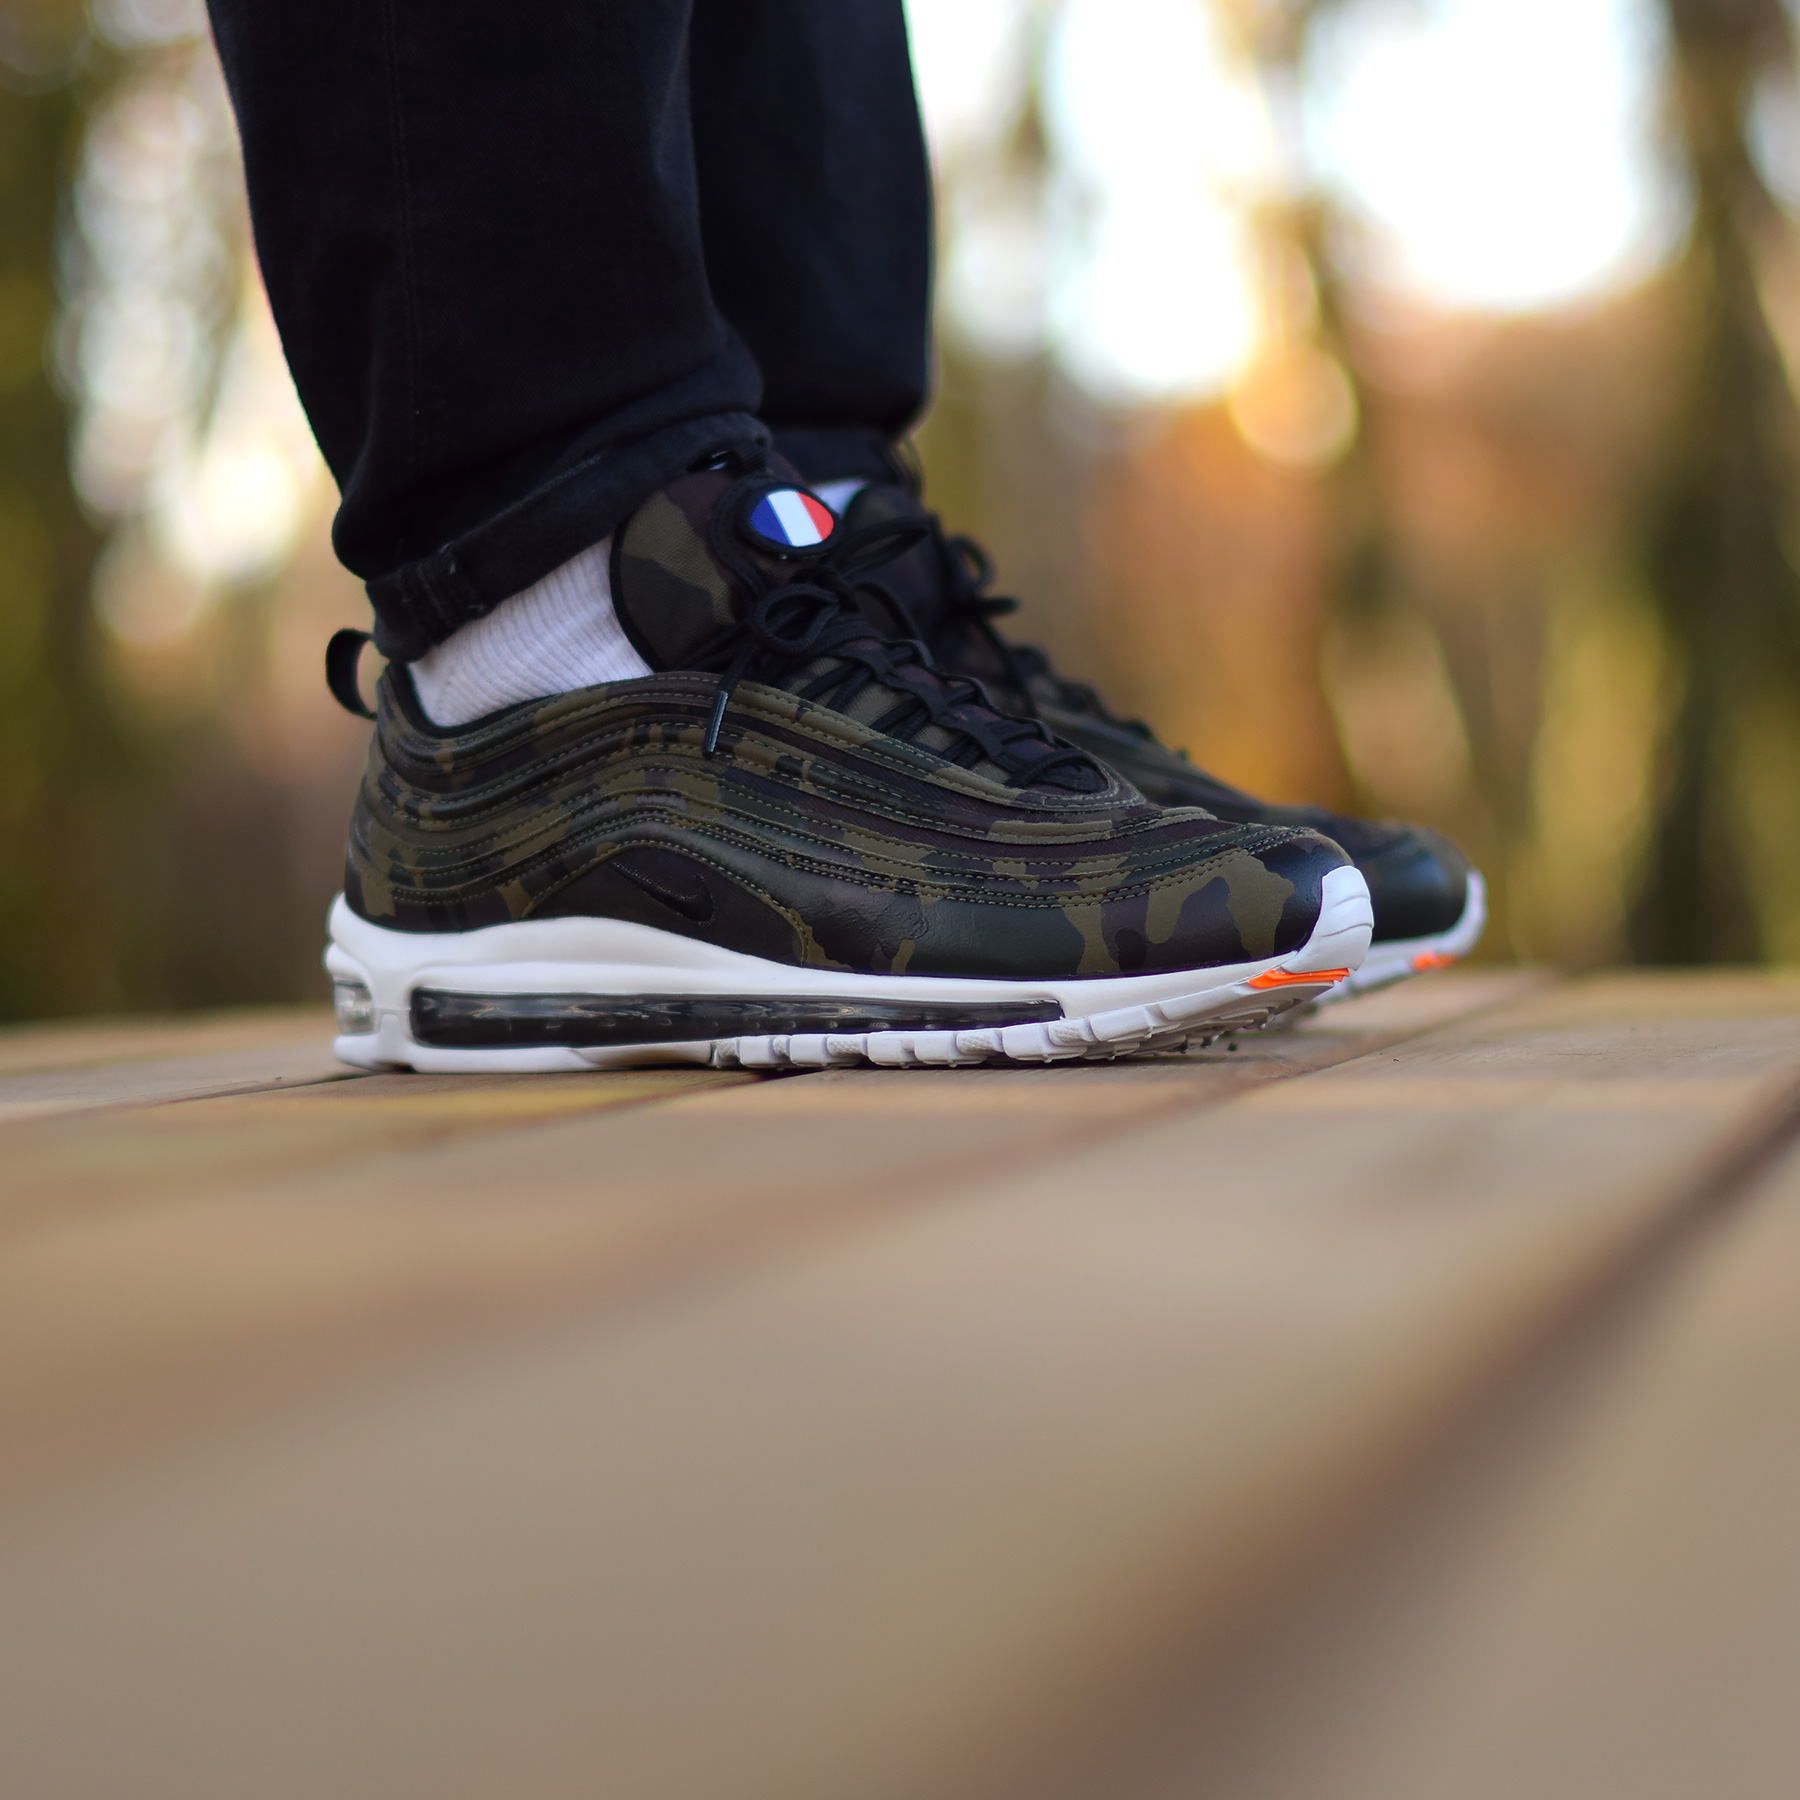 air max 97 french camo